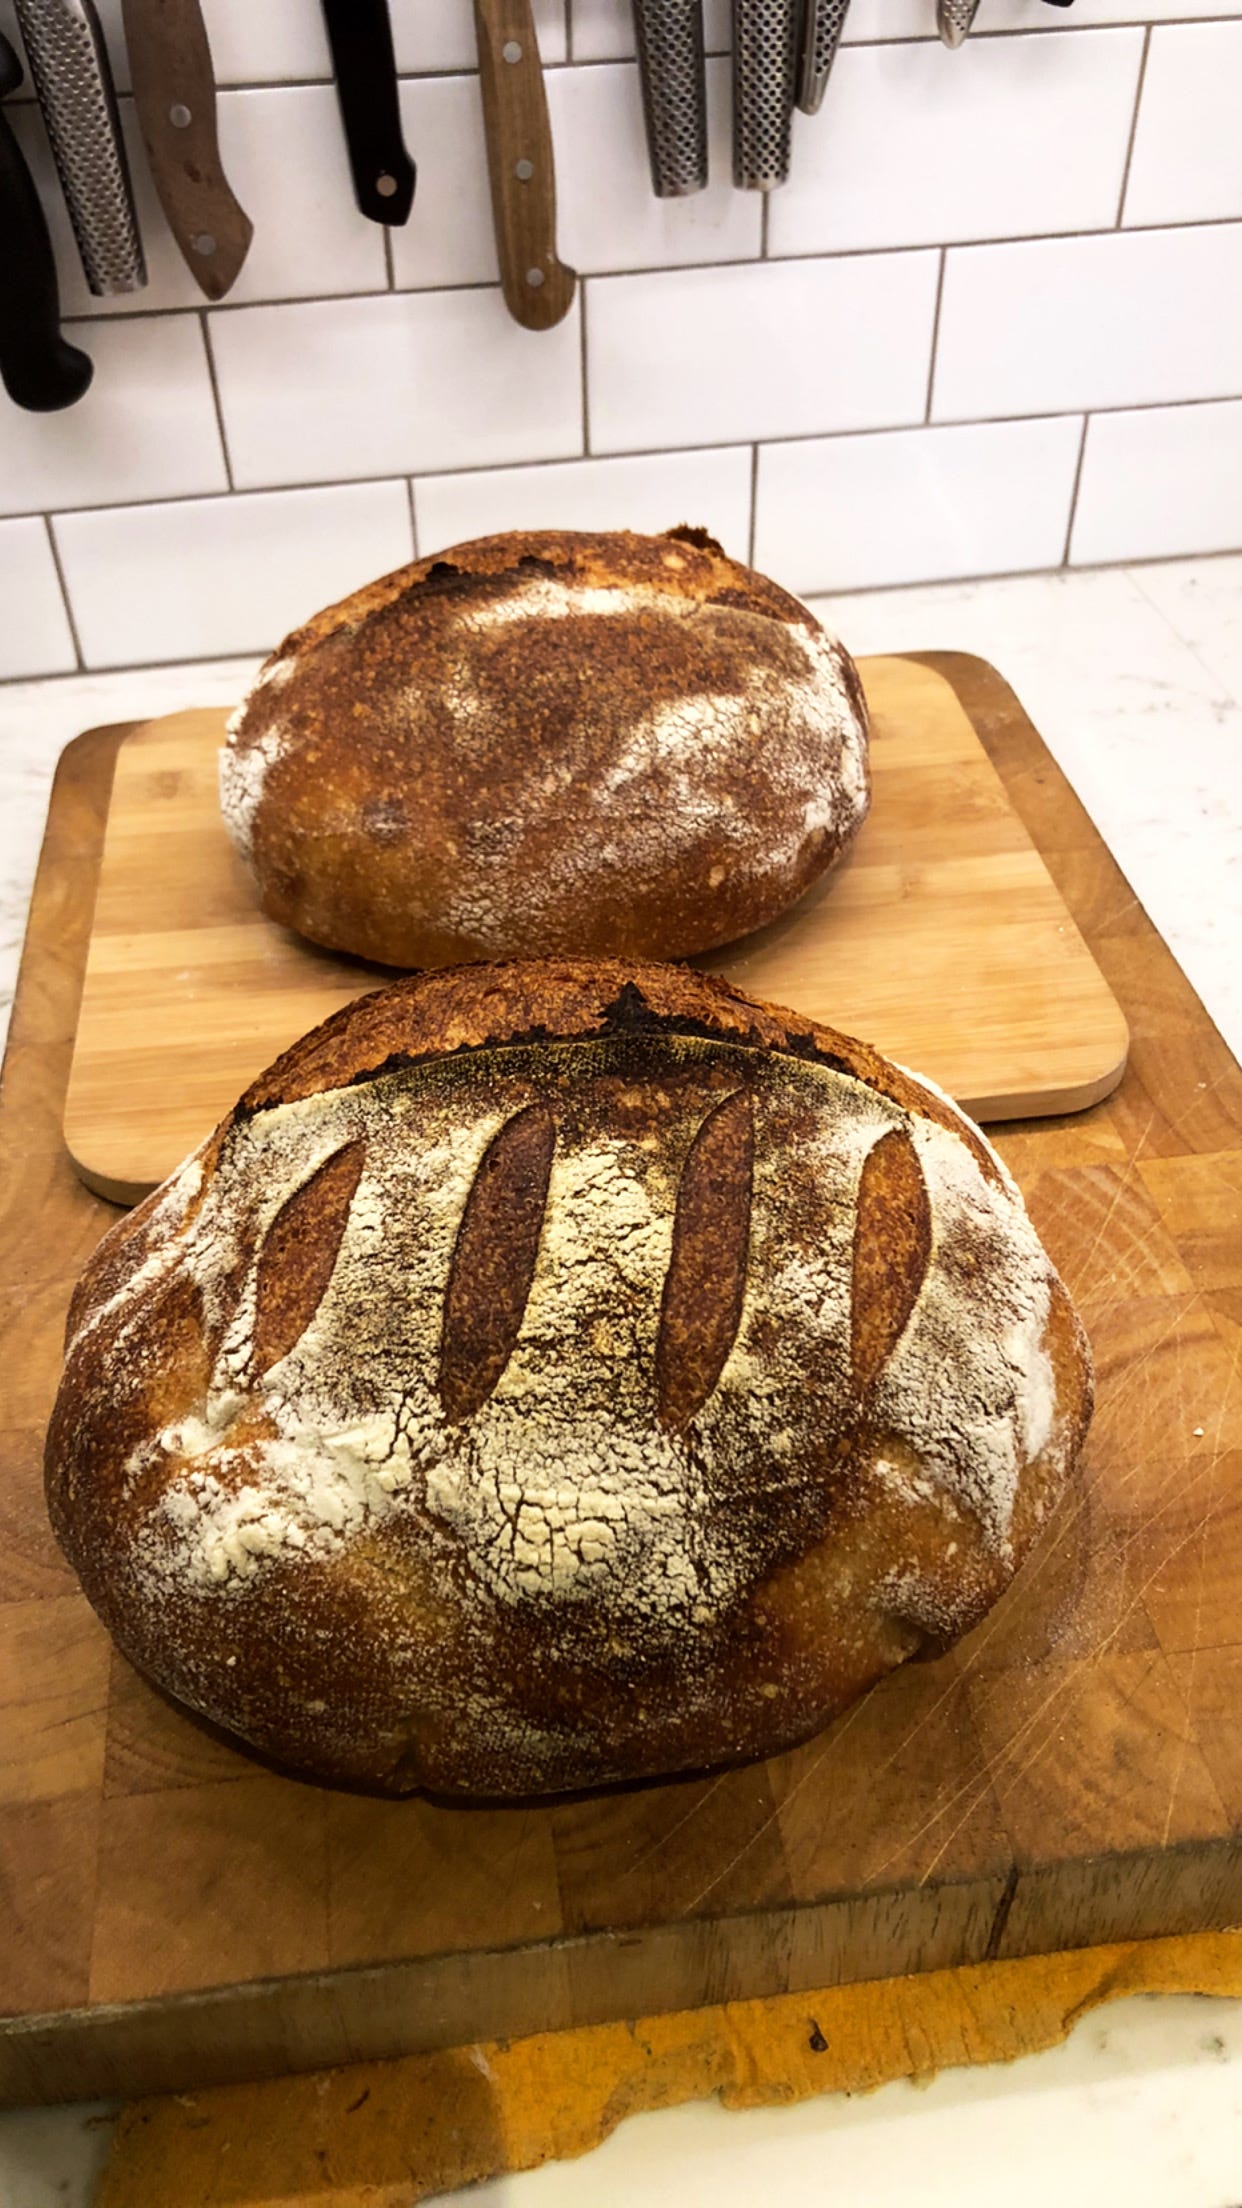 Two loaves of sourdough bread I baked